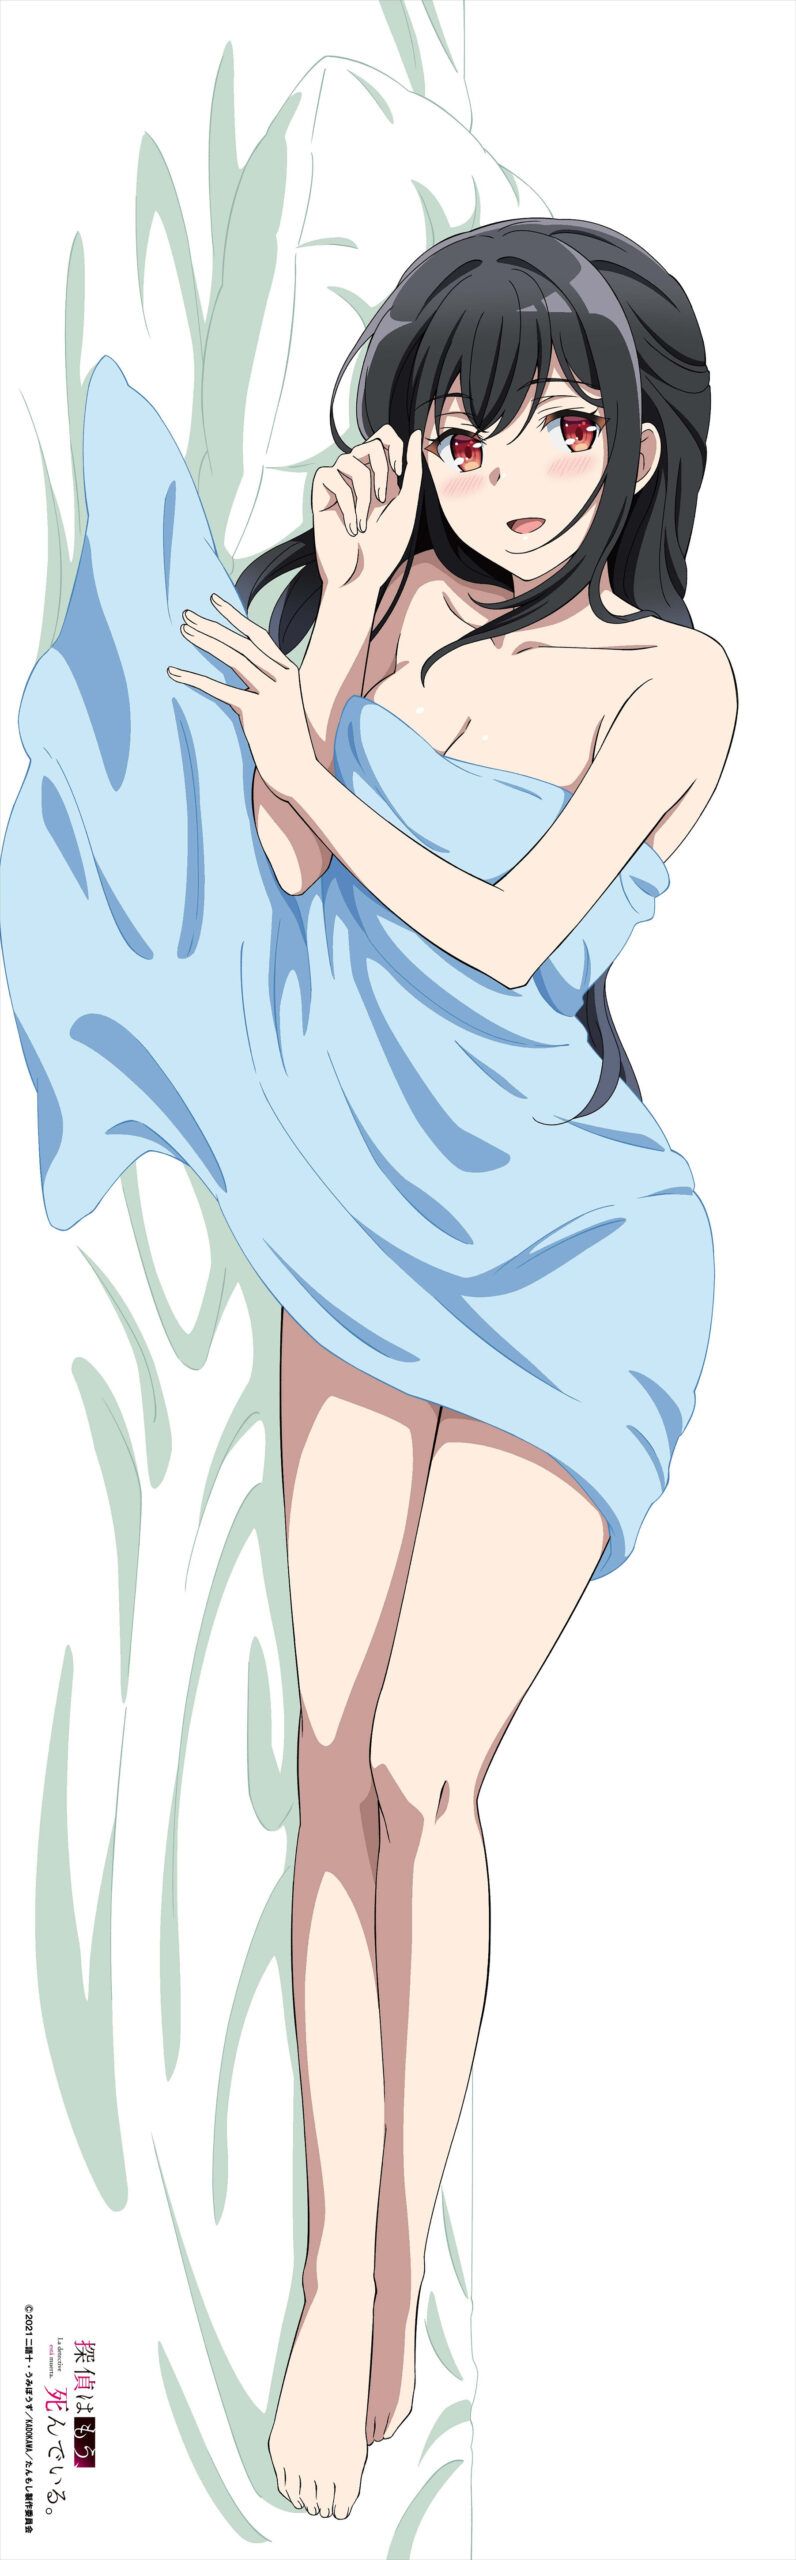 【Hugging Pillow】Images of erotic hugging pillowcases from anime and video games Part 144 16